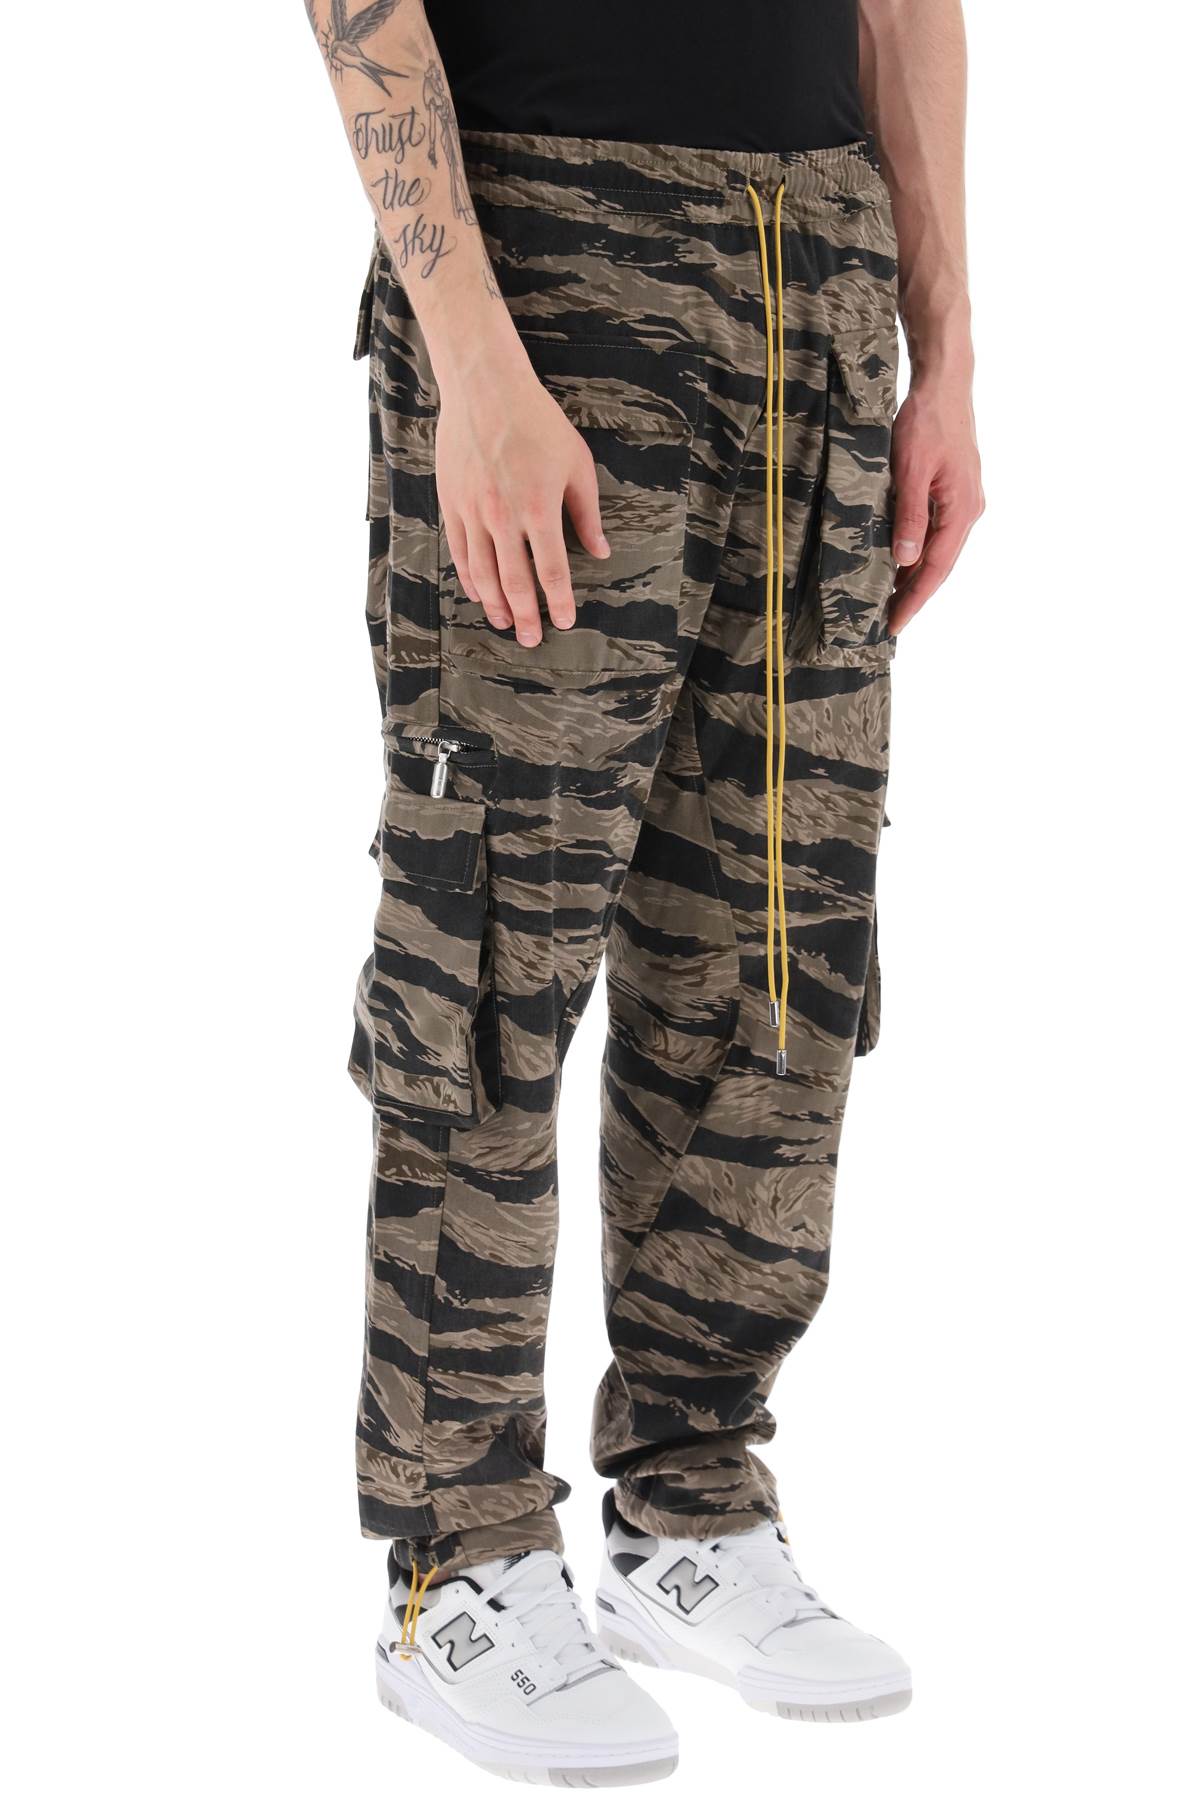 RHUDE Tiger Camo Cargo Pants for Men - SS23 Collection